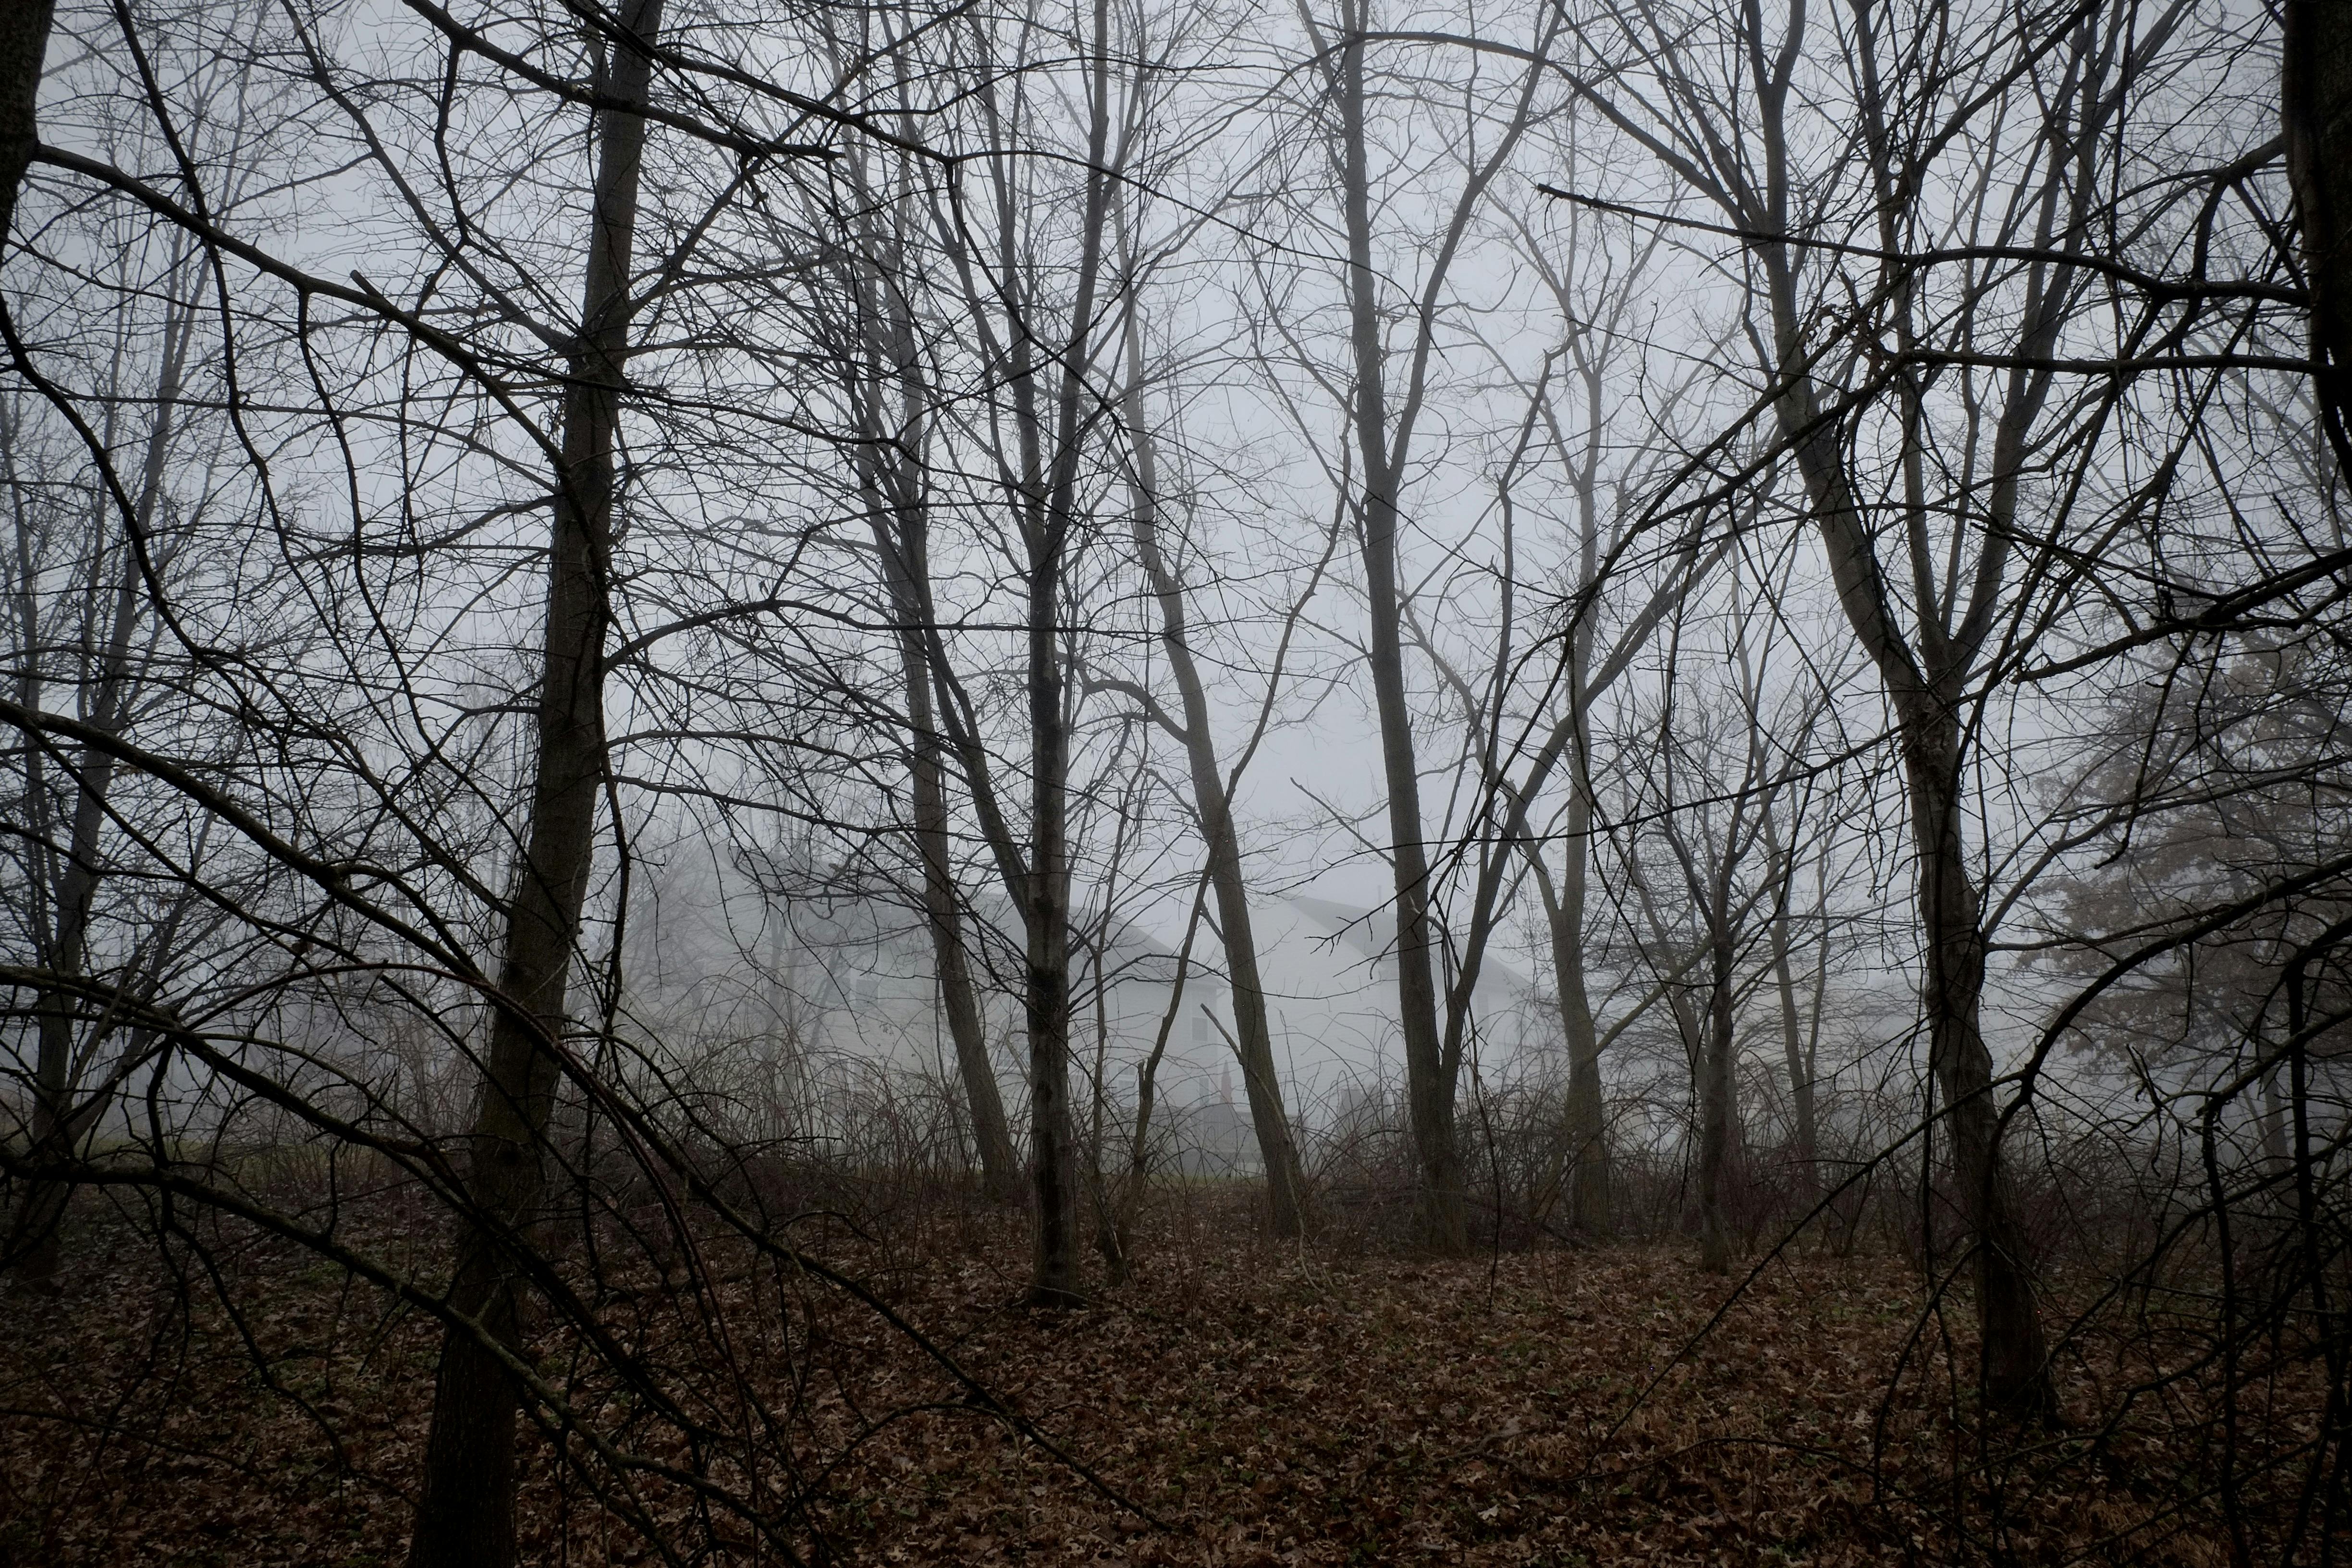 Faint houses in a dense fog beyond silhouetted trees in the foreground